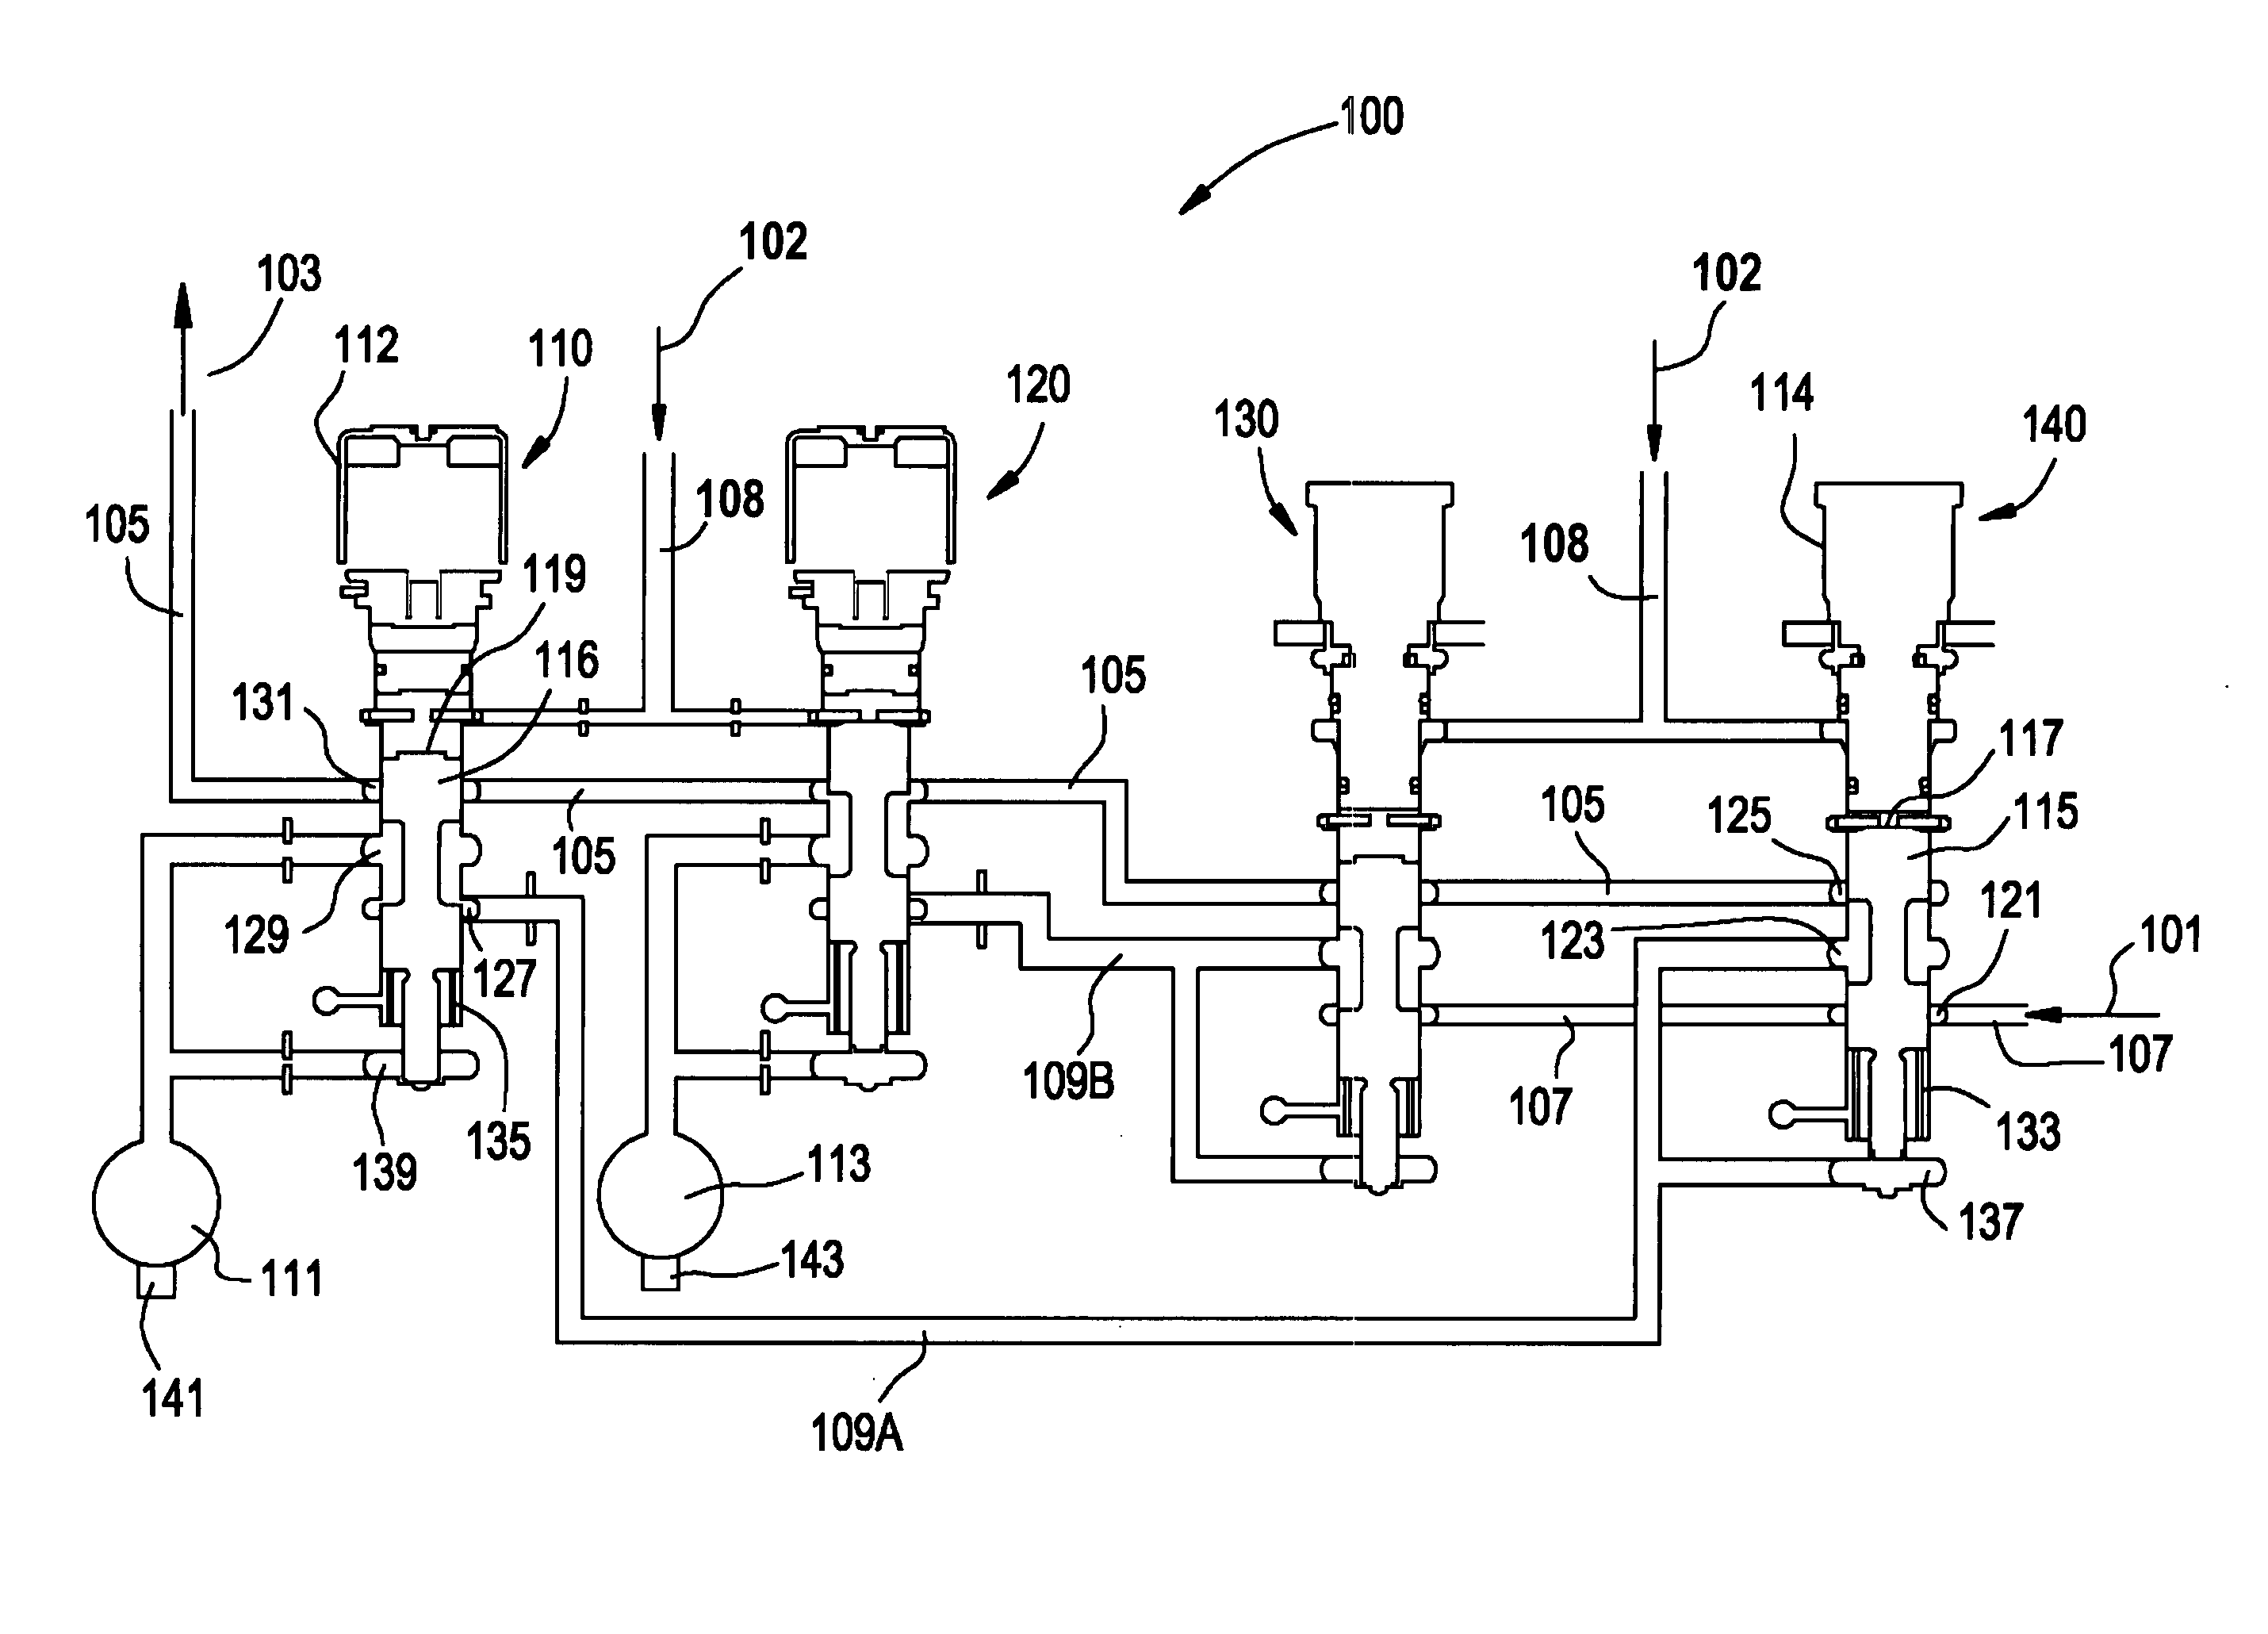 Control apparatus, method and diagnostic for hydraulic fill and drain